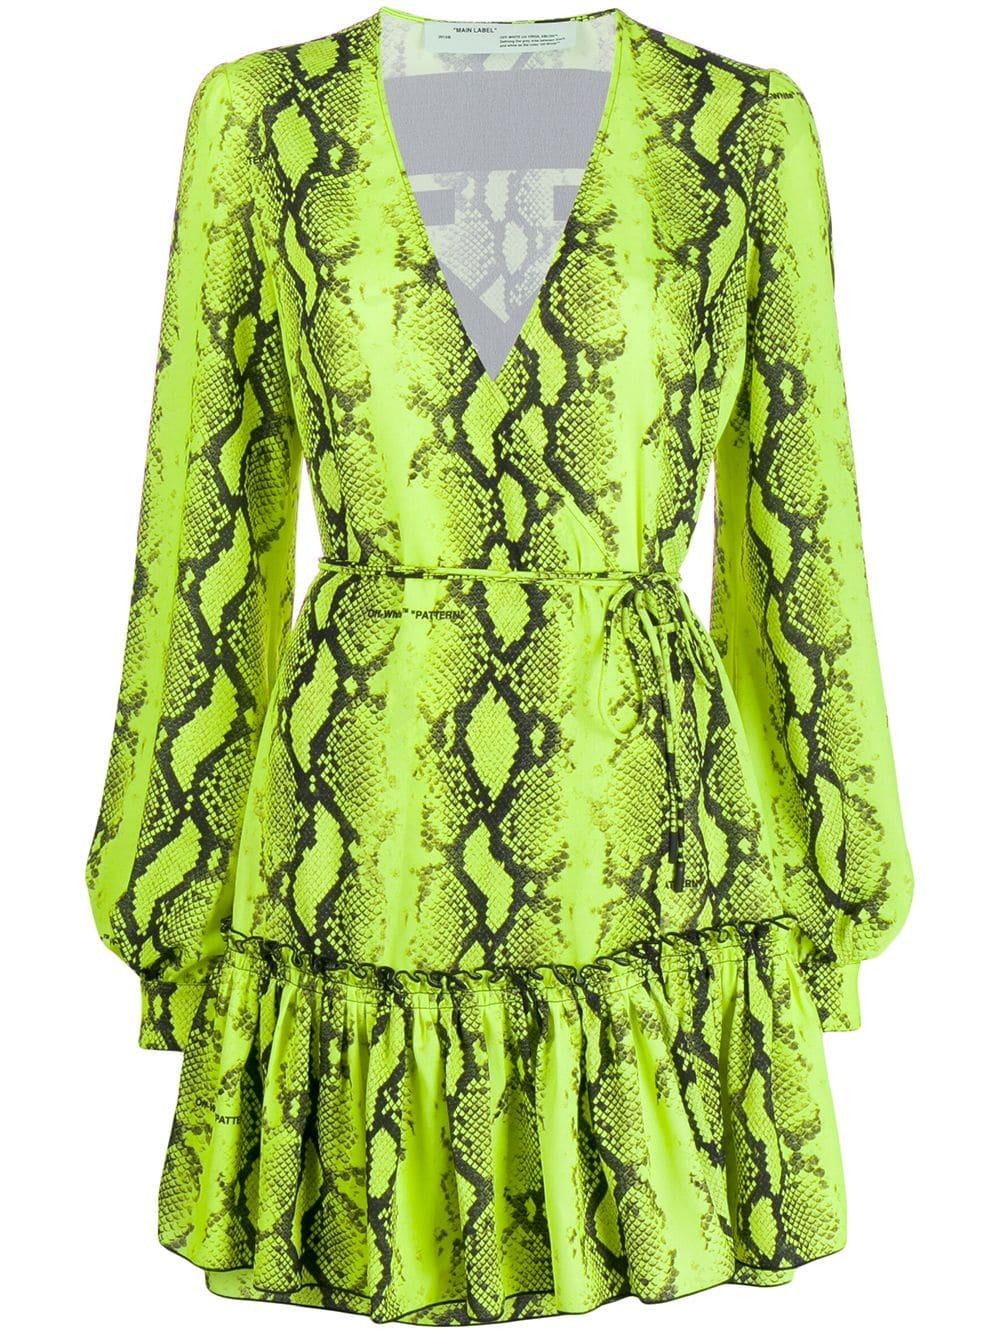 Off-White c/o Virgil Abloh Neon Snake Print Dress in Yellow | Lyst Canada